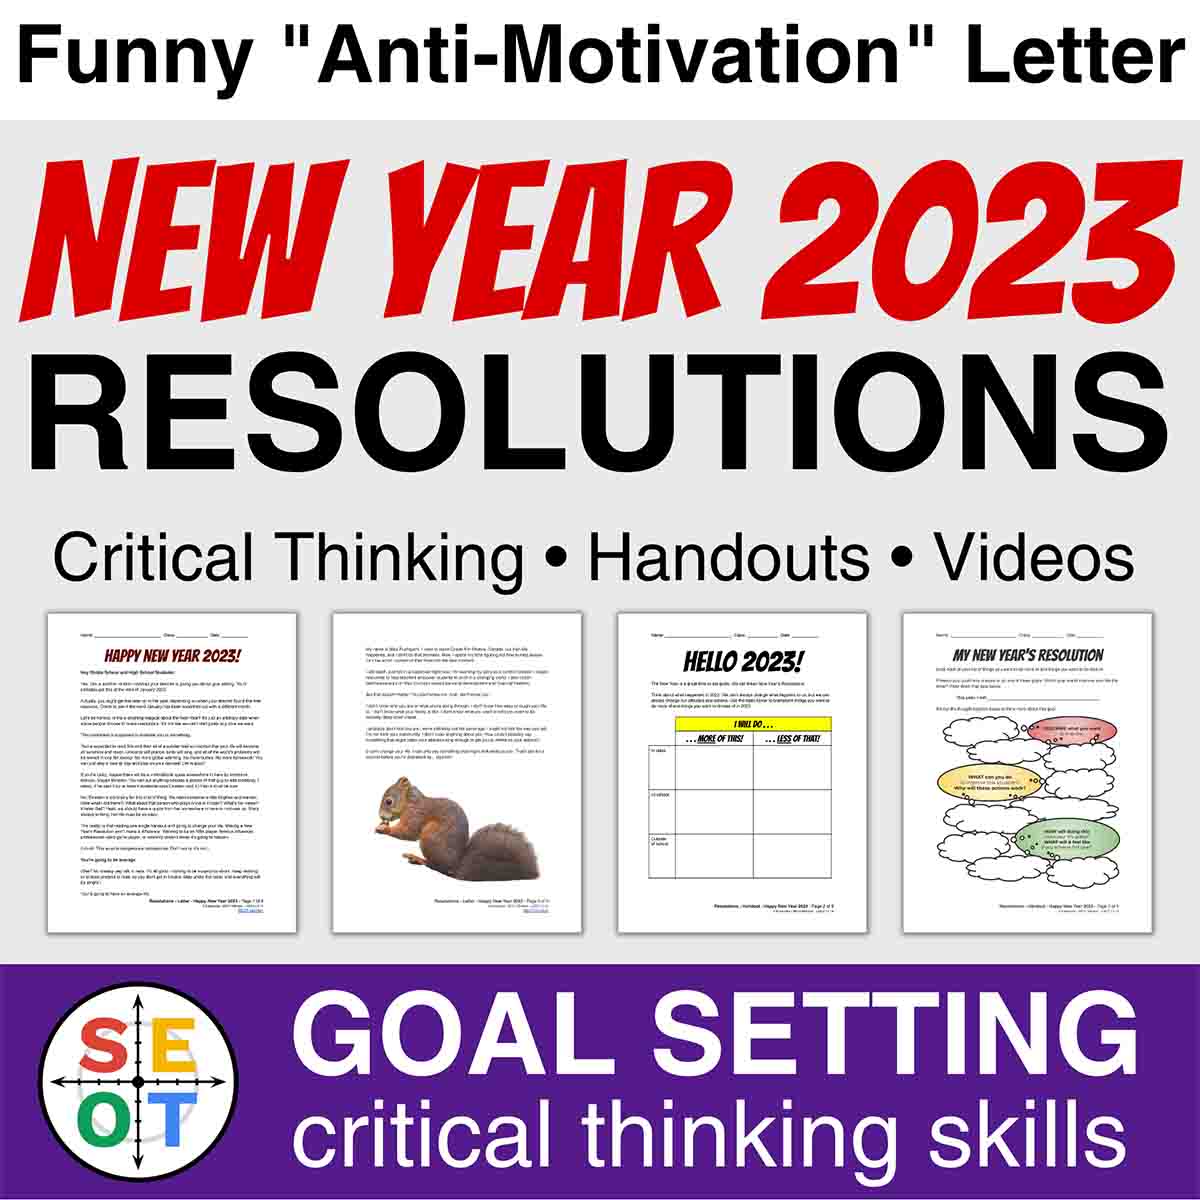 Resolutions V2022 12 14 Cover 1 1200x1200 1 